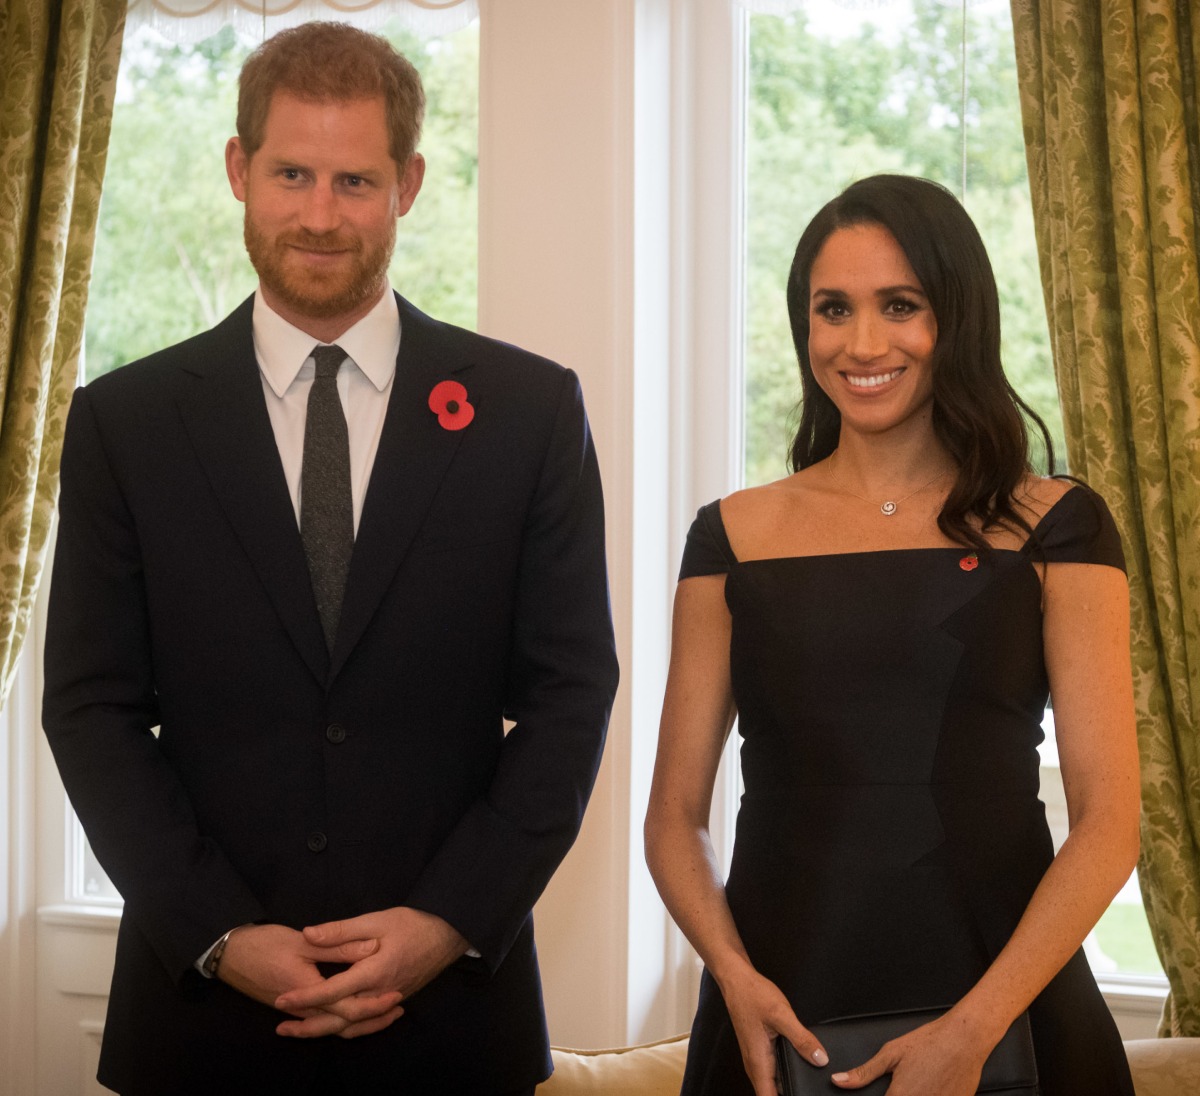 The Sussexes are going solo